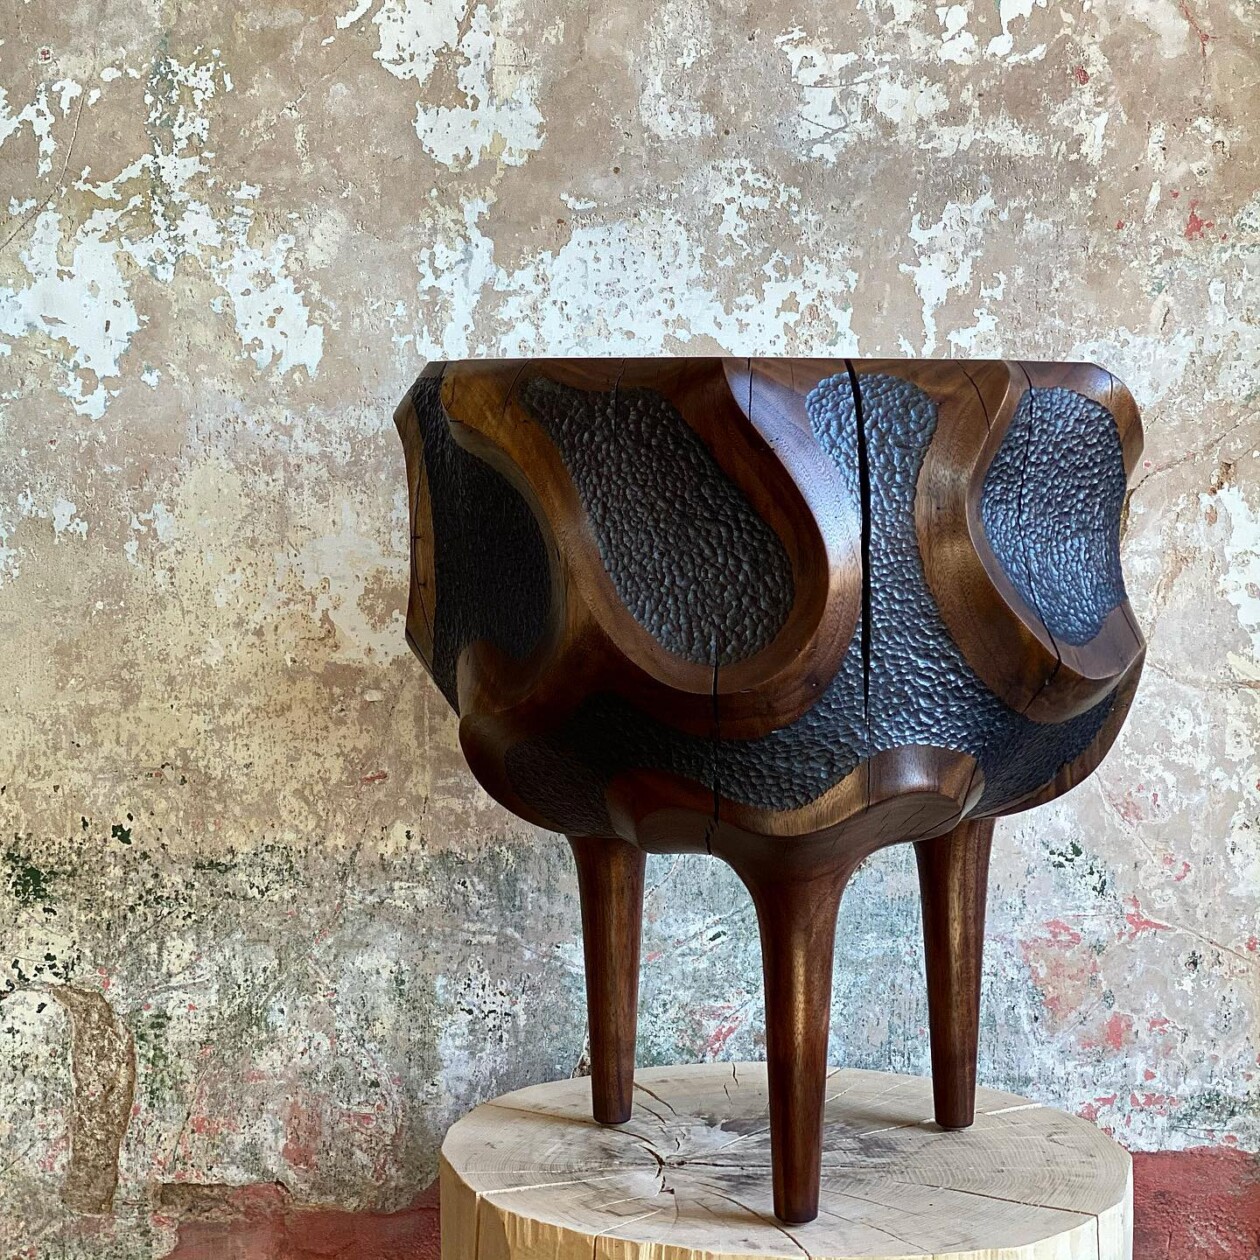 Intricately Engraved And Textured Organic Shaped Furniture By Caleb Woodard (1)